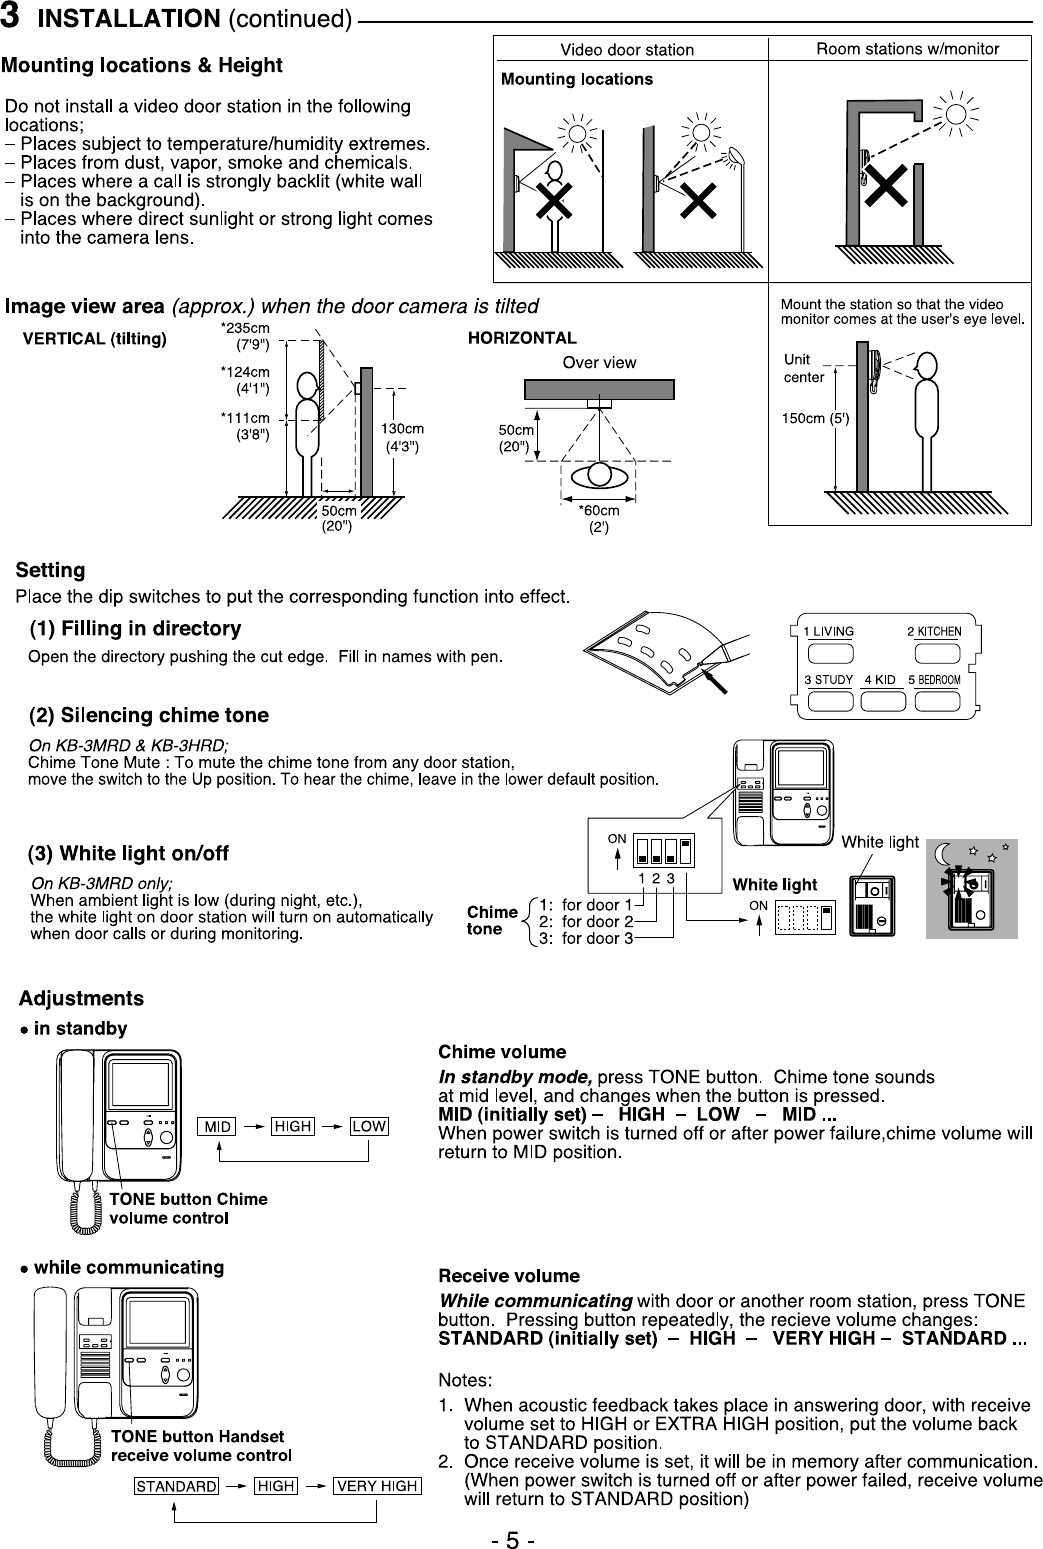 Page 5 of 8 - Aiphone Aiphone-Kb-3Hrd-Users-Manual-  Aiphone-kb-3hrd-users-manual